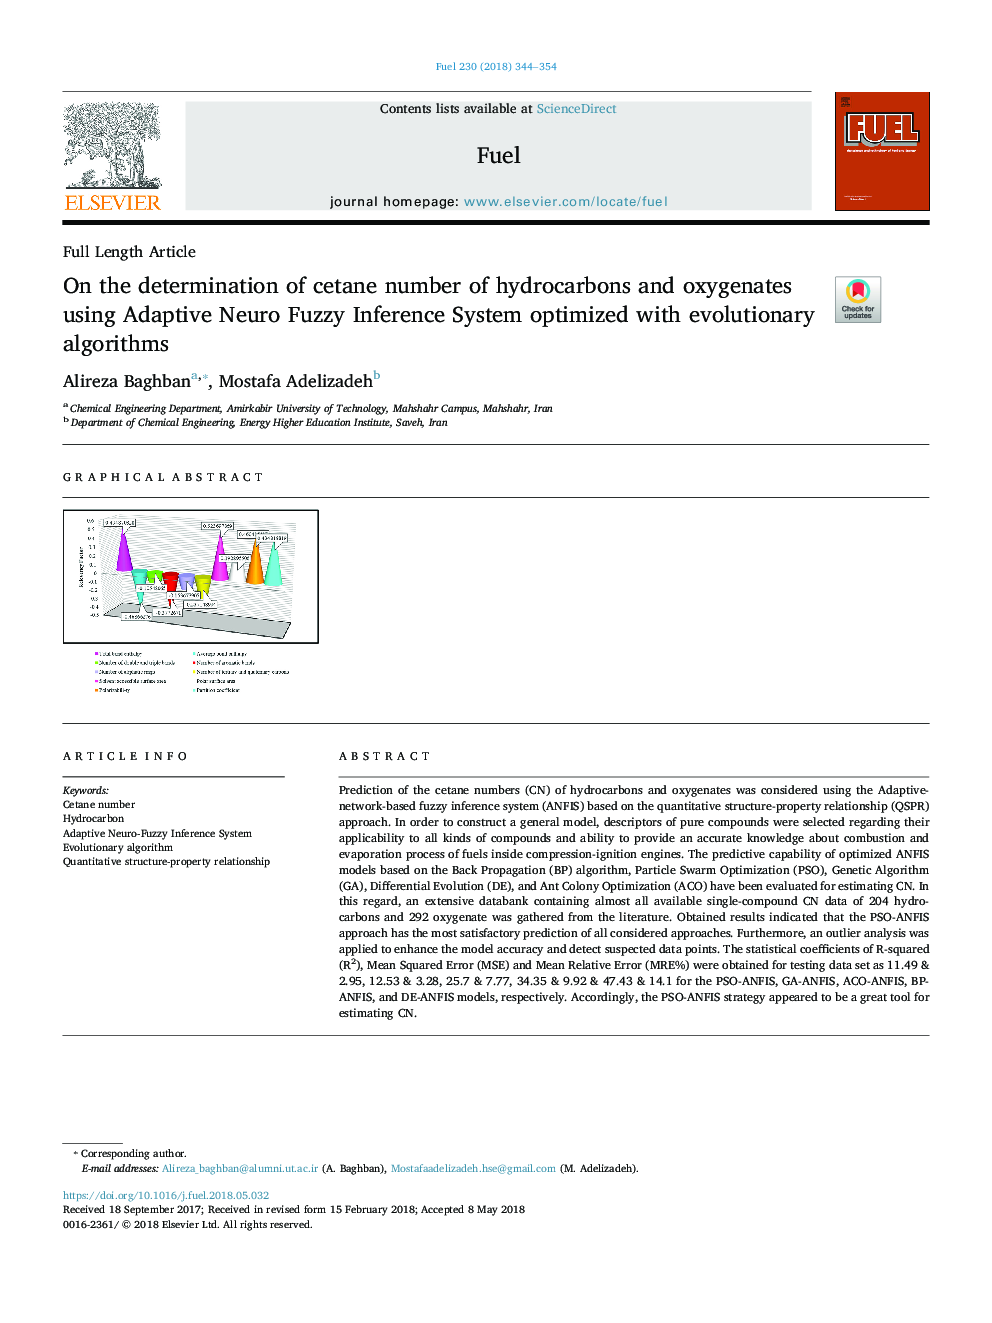 On the determination of cetane number of hydrocarbons and oxygenates using Adaptive Neuro Fuzzy Inference System optimized with evolutionary algorithms